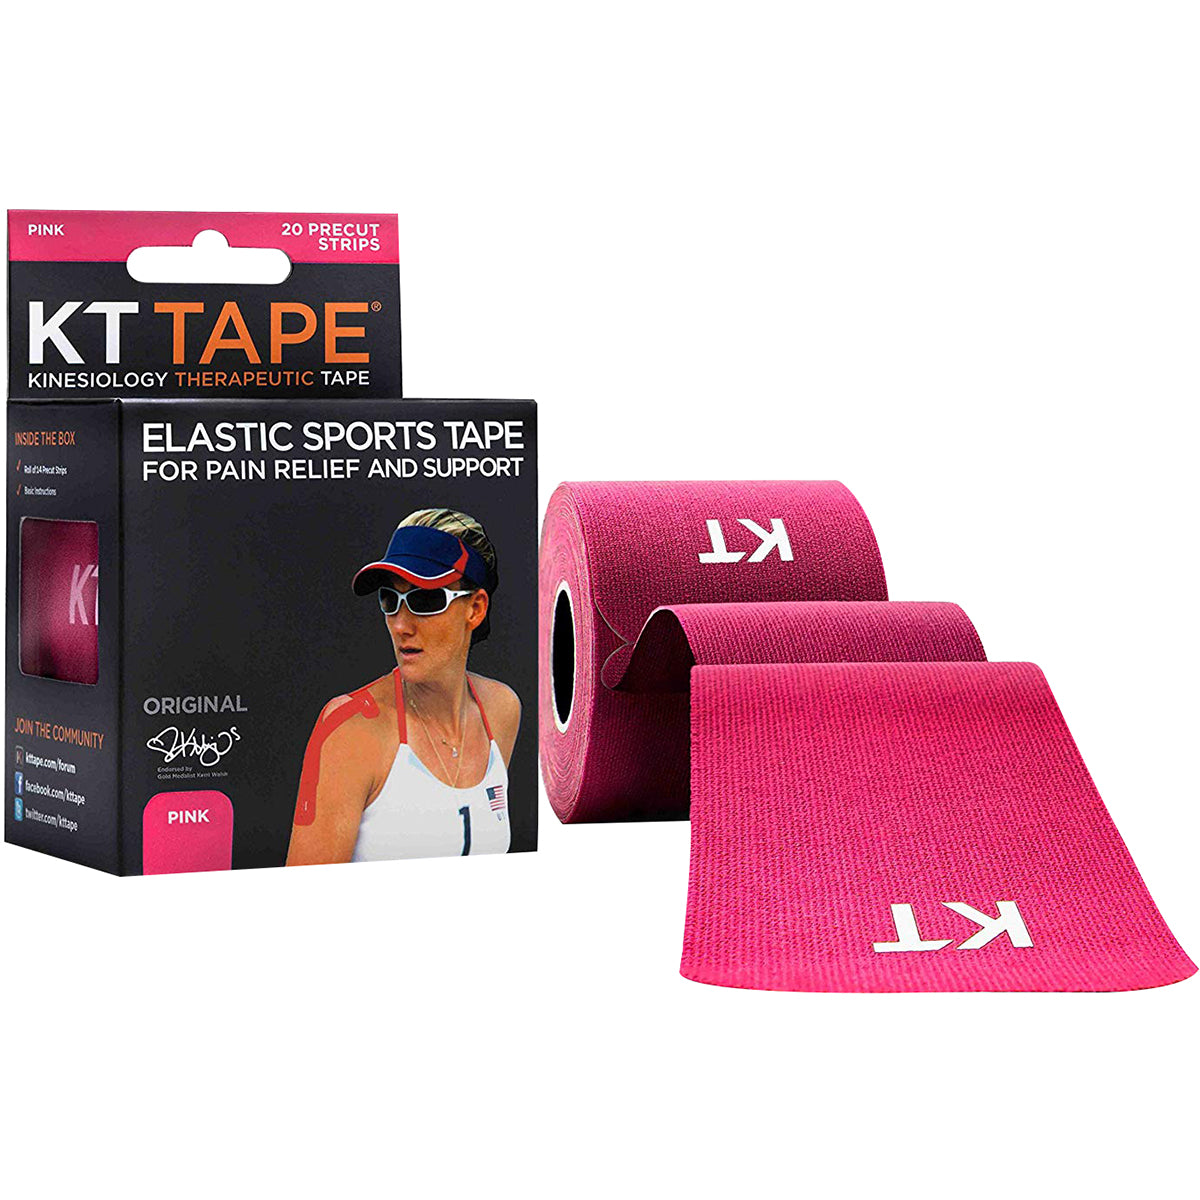 KT Tape Cotton 10" Precut Kinesiology Therapeutic Sports Roll, 20 Strips, Pink KT Tape